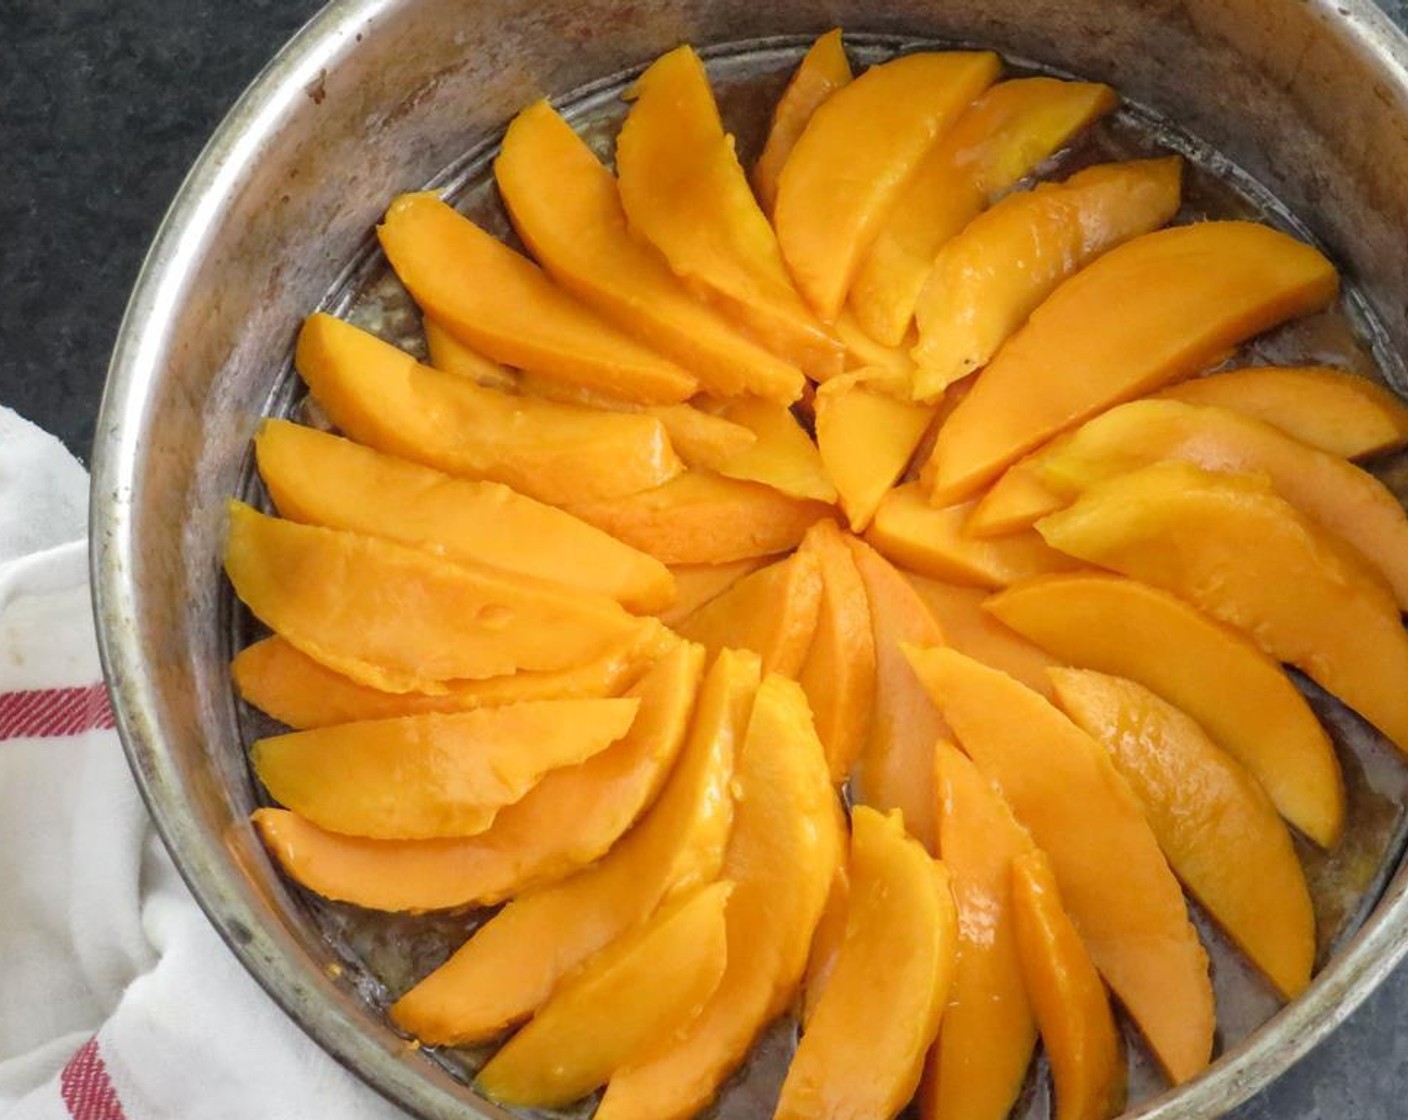 step 2 Melt Unsalted Butter (1/4 cup) and pour into the bottom of a springform pan. Sprinkle Brown Sugar (1/3 cup) evenly over the bottom of the pan. Arrange the mangoes in a sunshine pattern along the bottom of the pan, overlapping as you go.